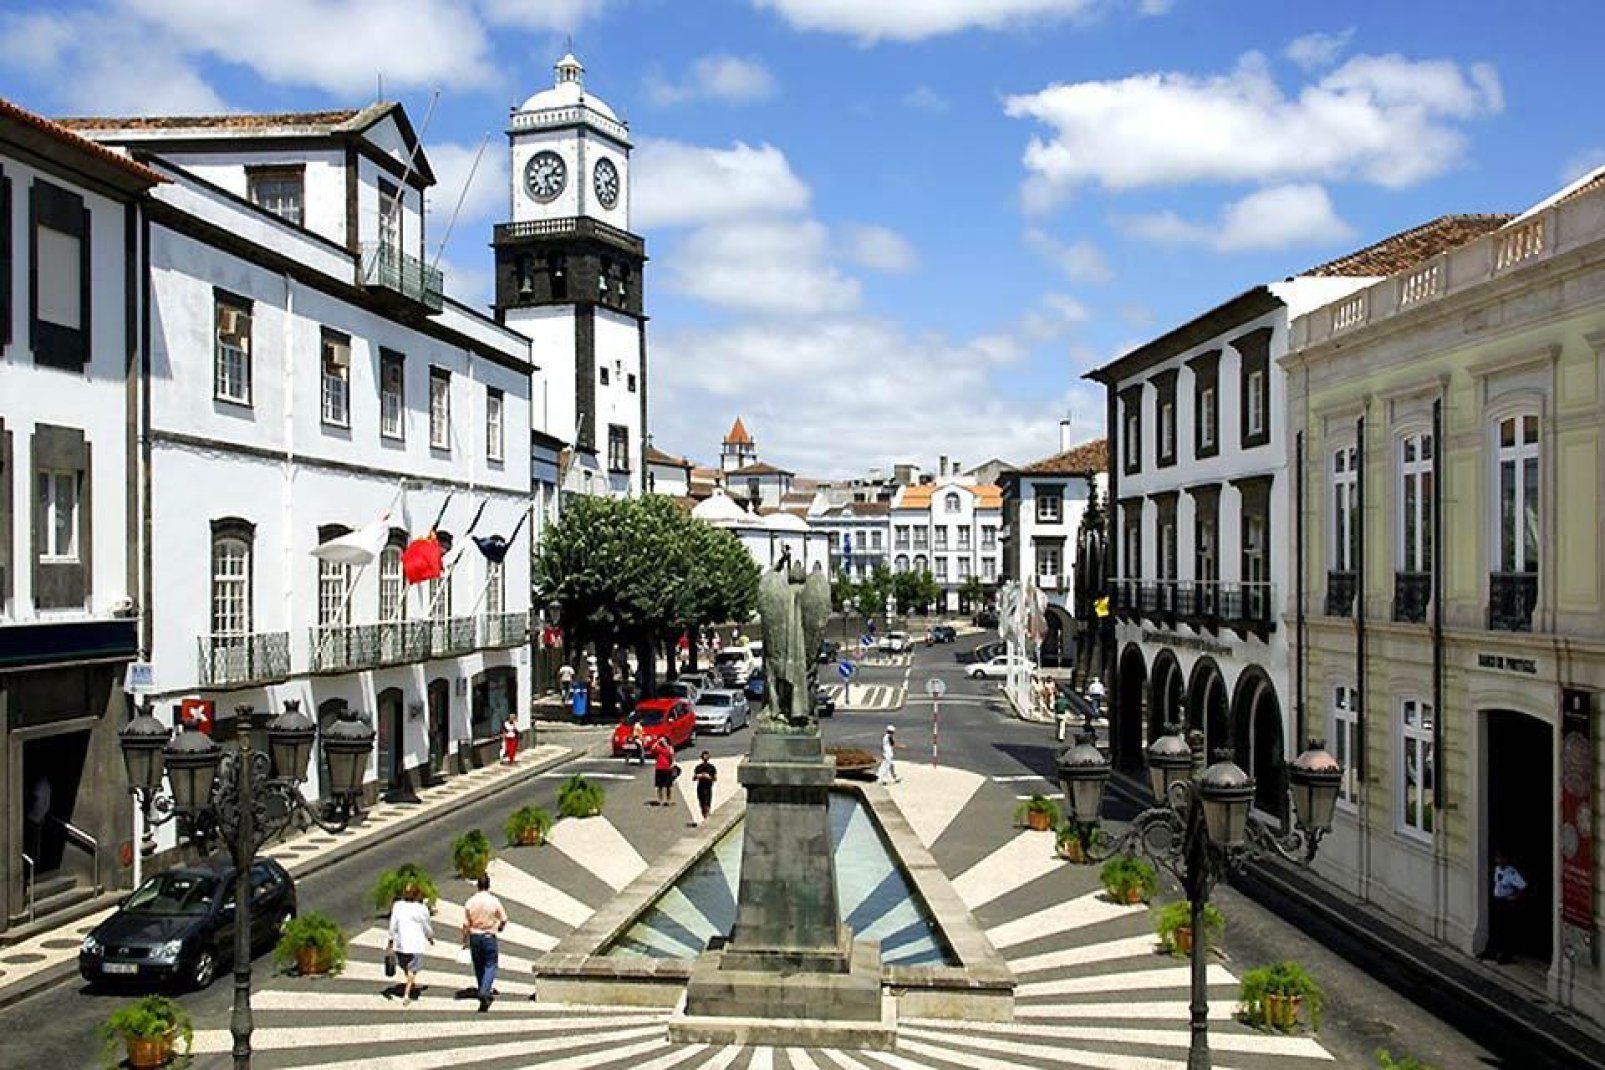 Ponta Delgada, on the island of São Miguel, is the biggest city in the archipelago and is the administrative capital of the region. Its lively seafront is great for relaxing walks.